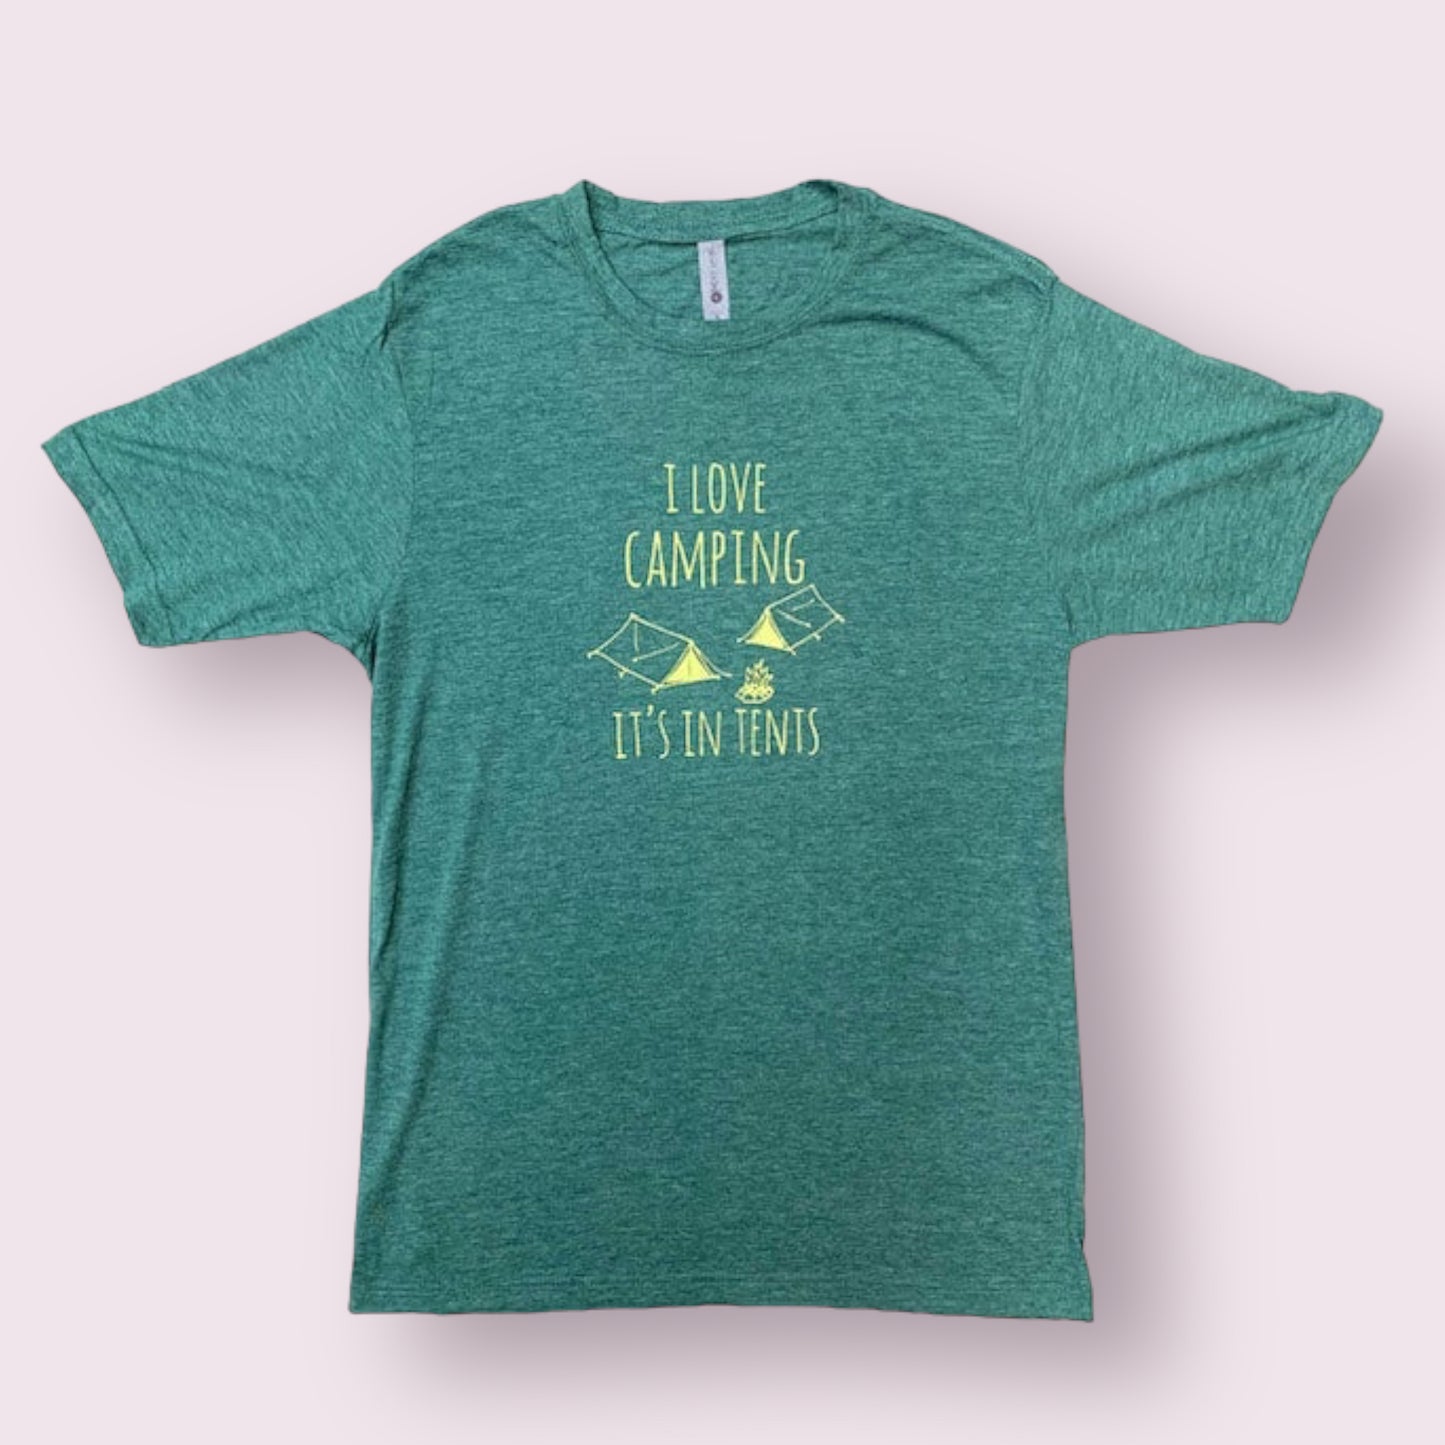 I Love Camping It's In Tents - Men's T-Shirt